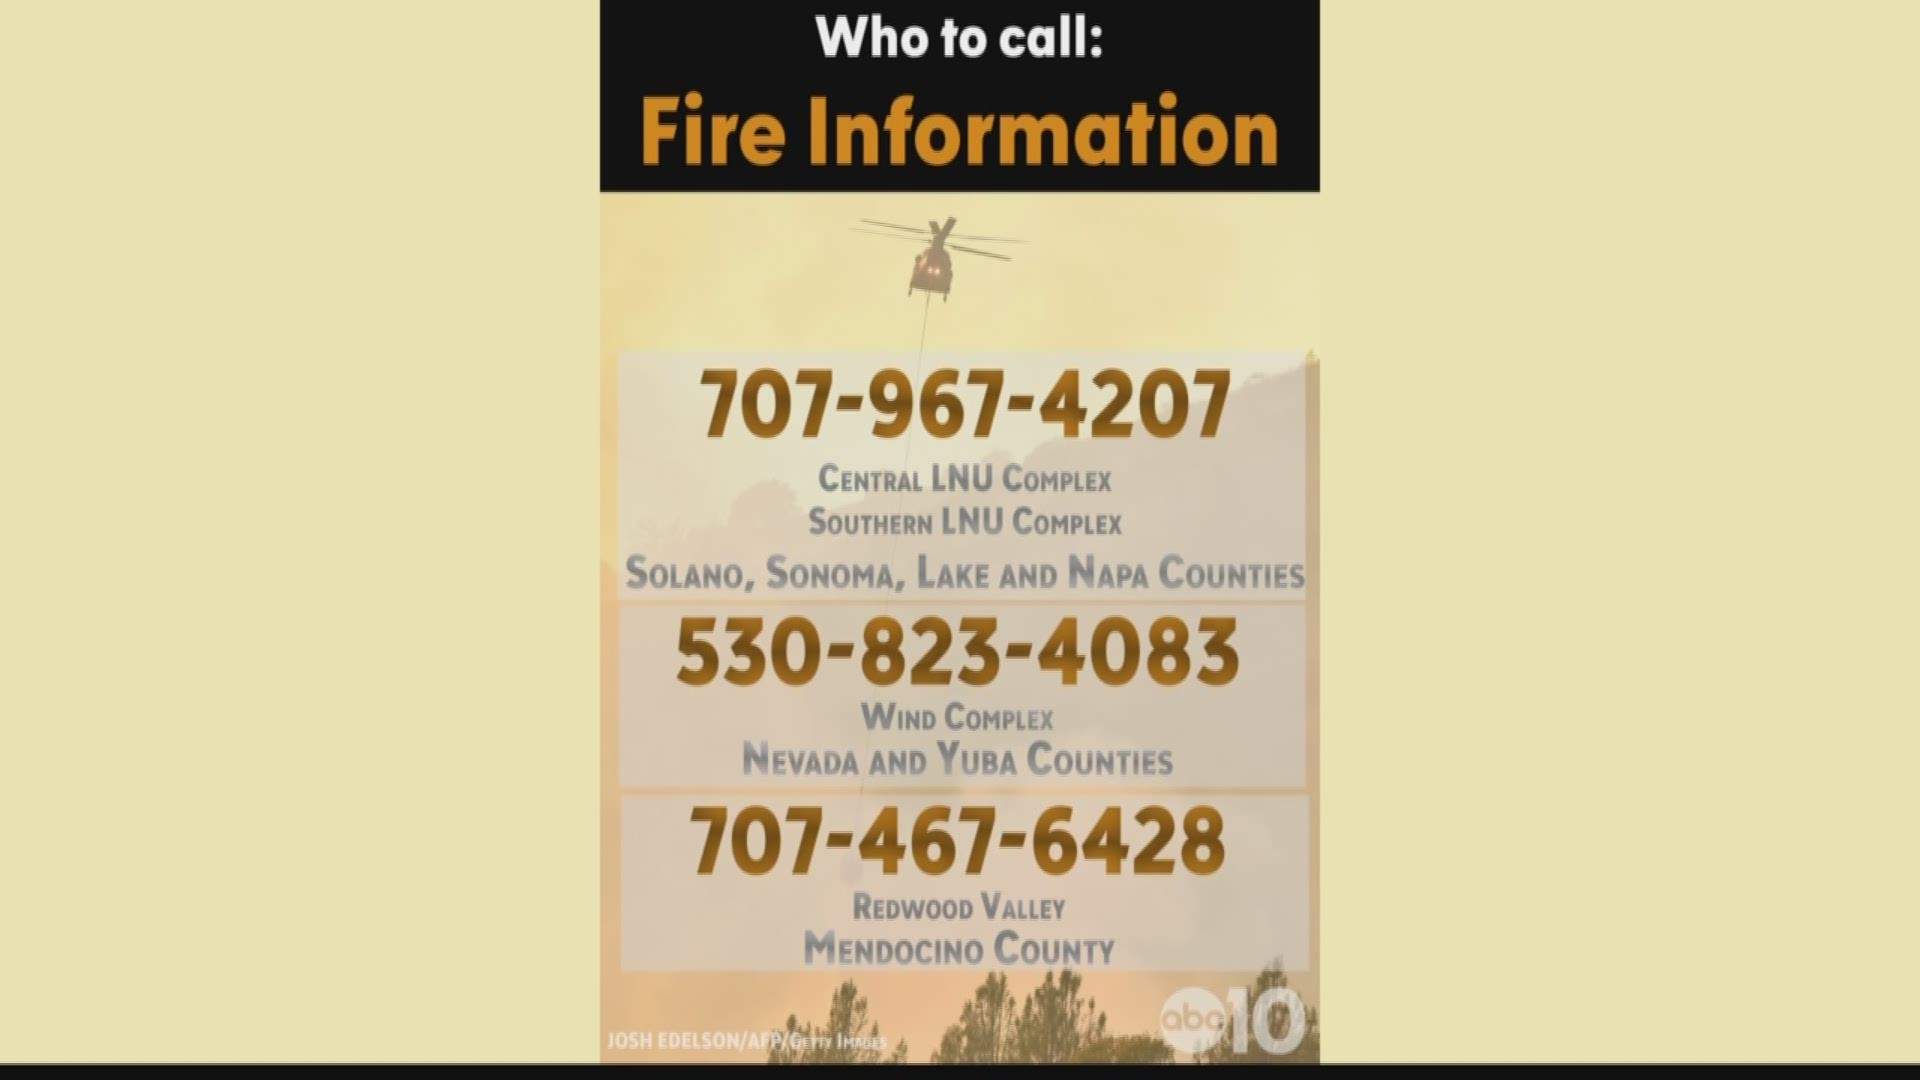 The three phone numbers will connect you to fire officials in each specified county. (Oct. 14, 2017)